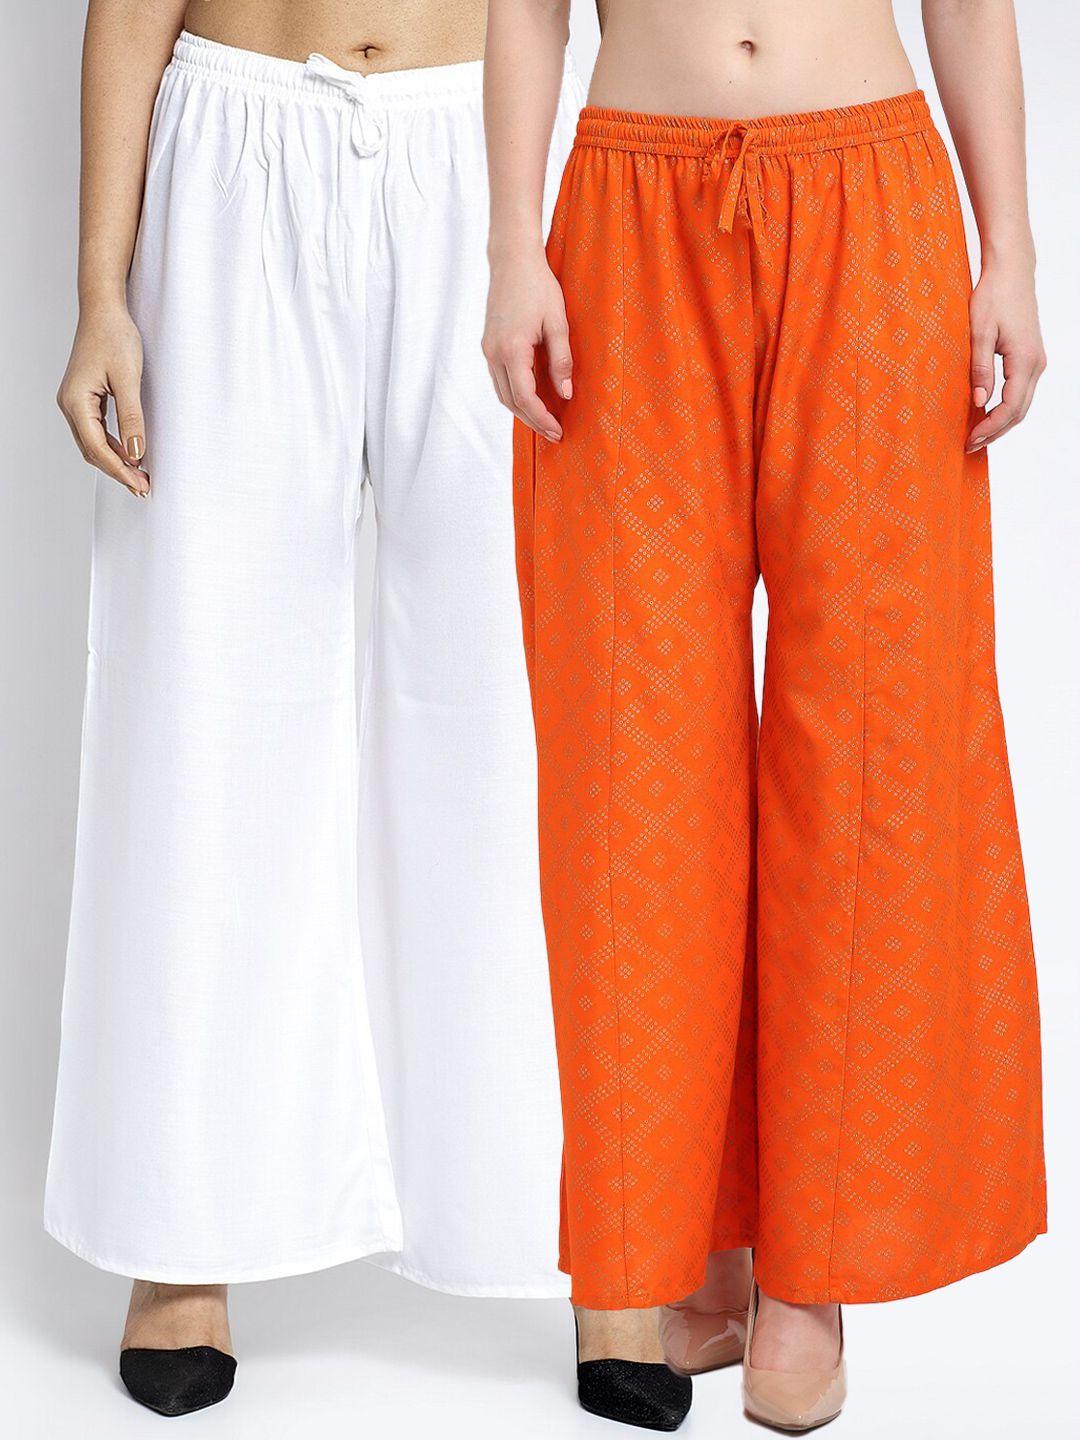 gracit women pack of 2 white & orange printed flared knitted ethnic palazzos